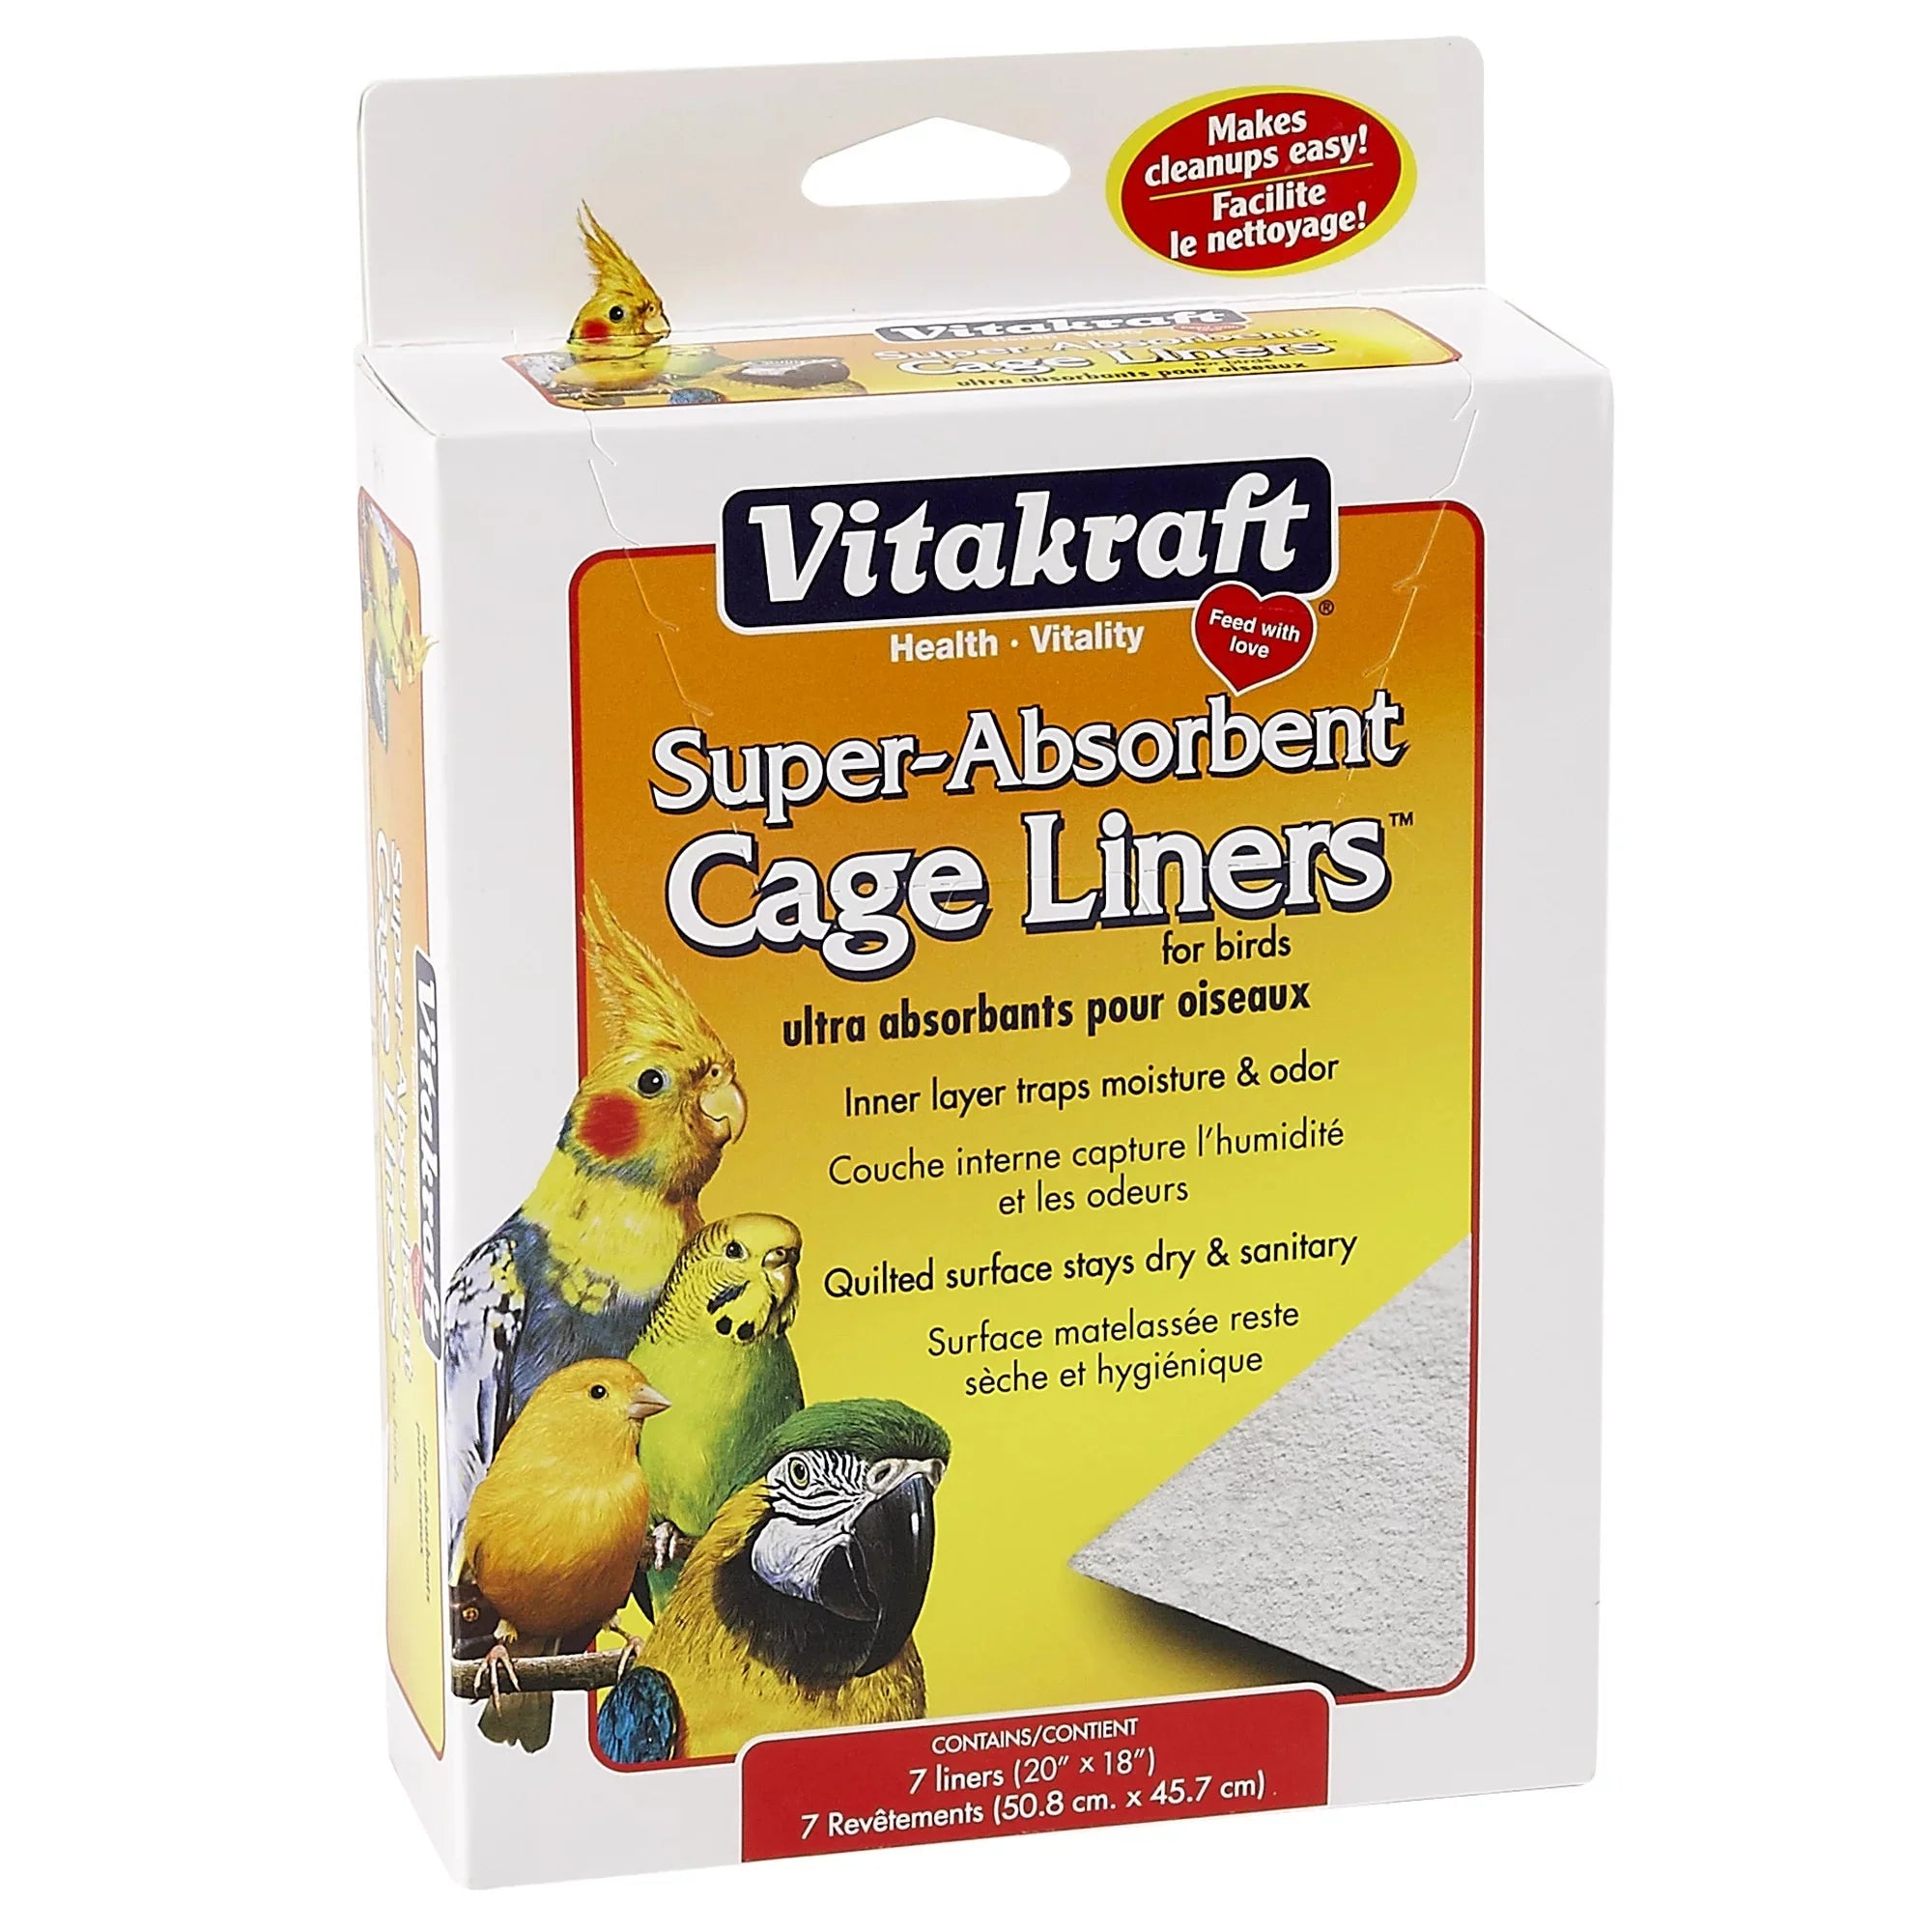 Wholesale prices with free shipping all over United States Vitakraft Cage Liners for Birds - For Parrot, Parakeet, Conure, and Cockatiel Cages, 7 Liners - Steven Deals